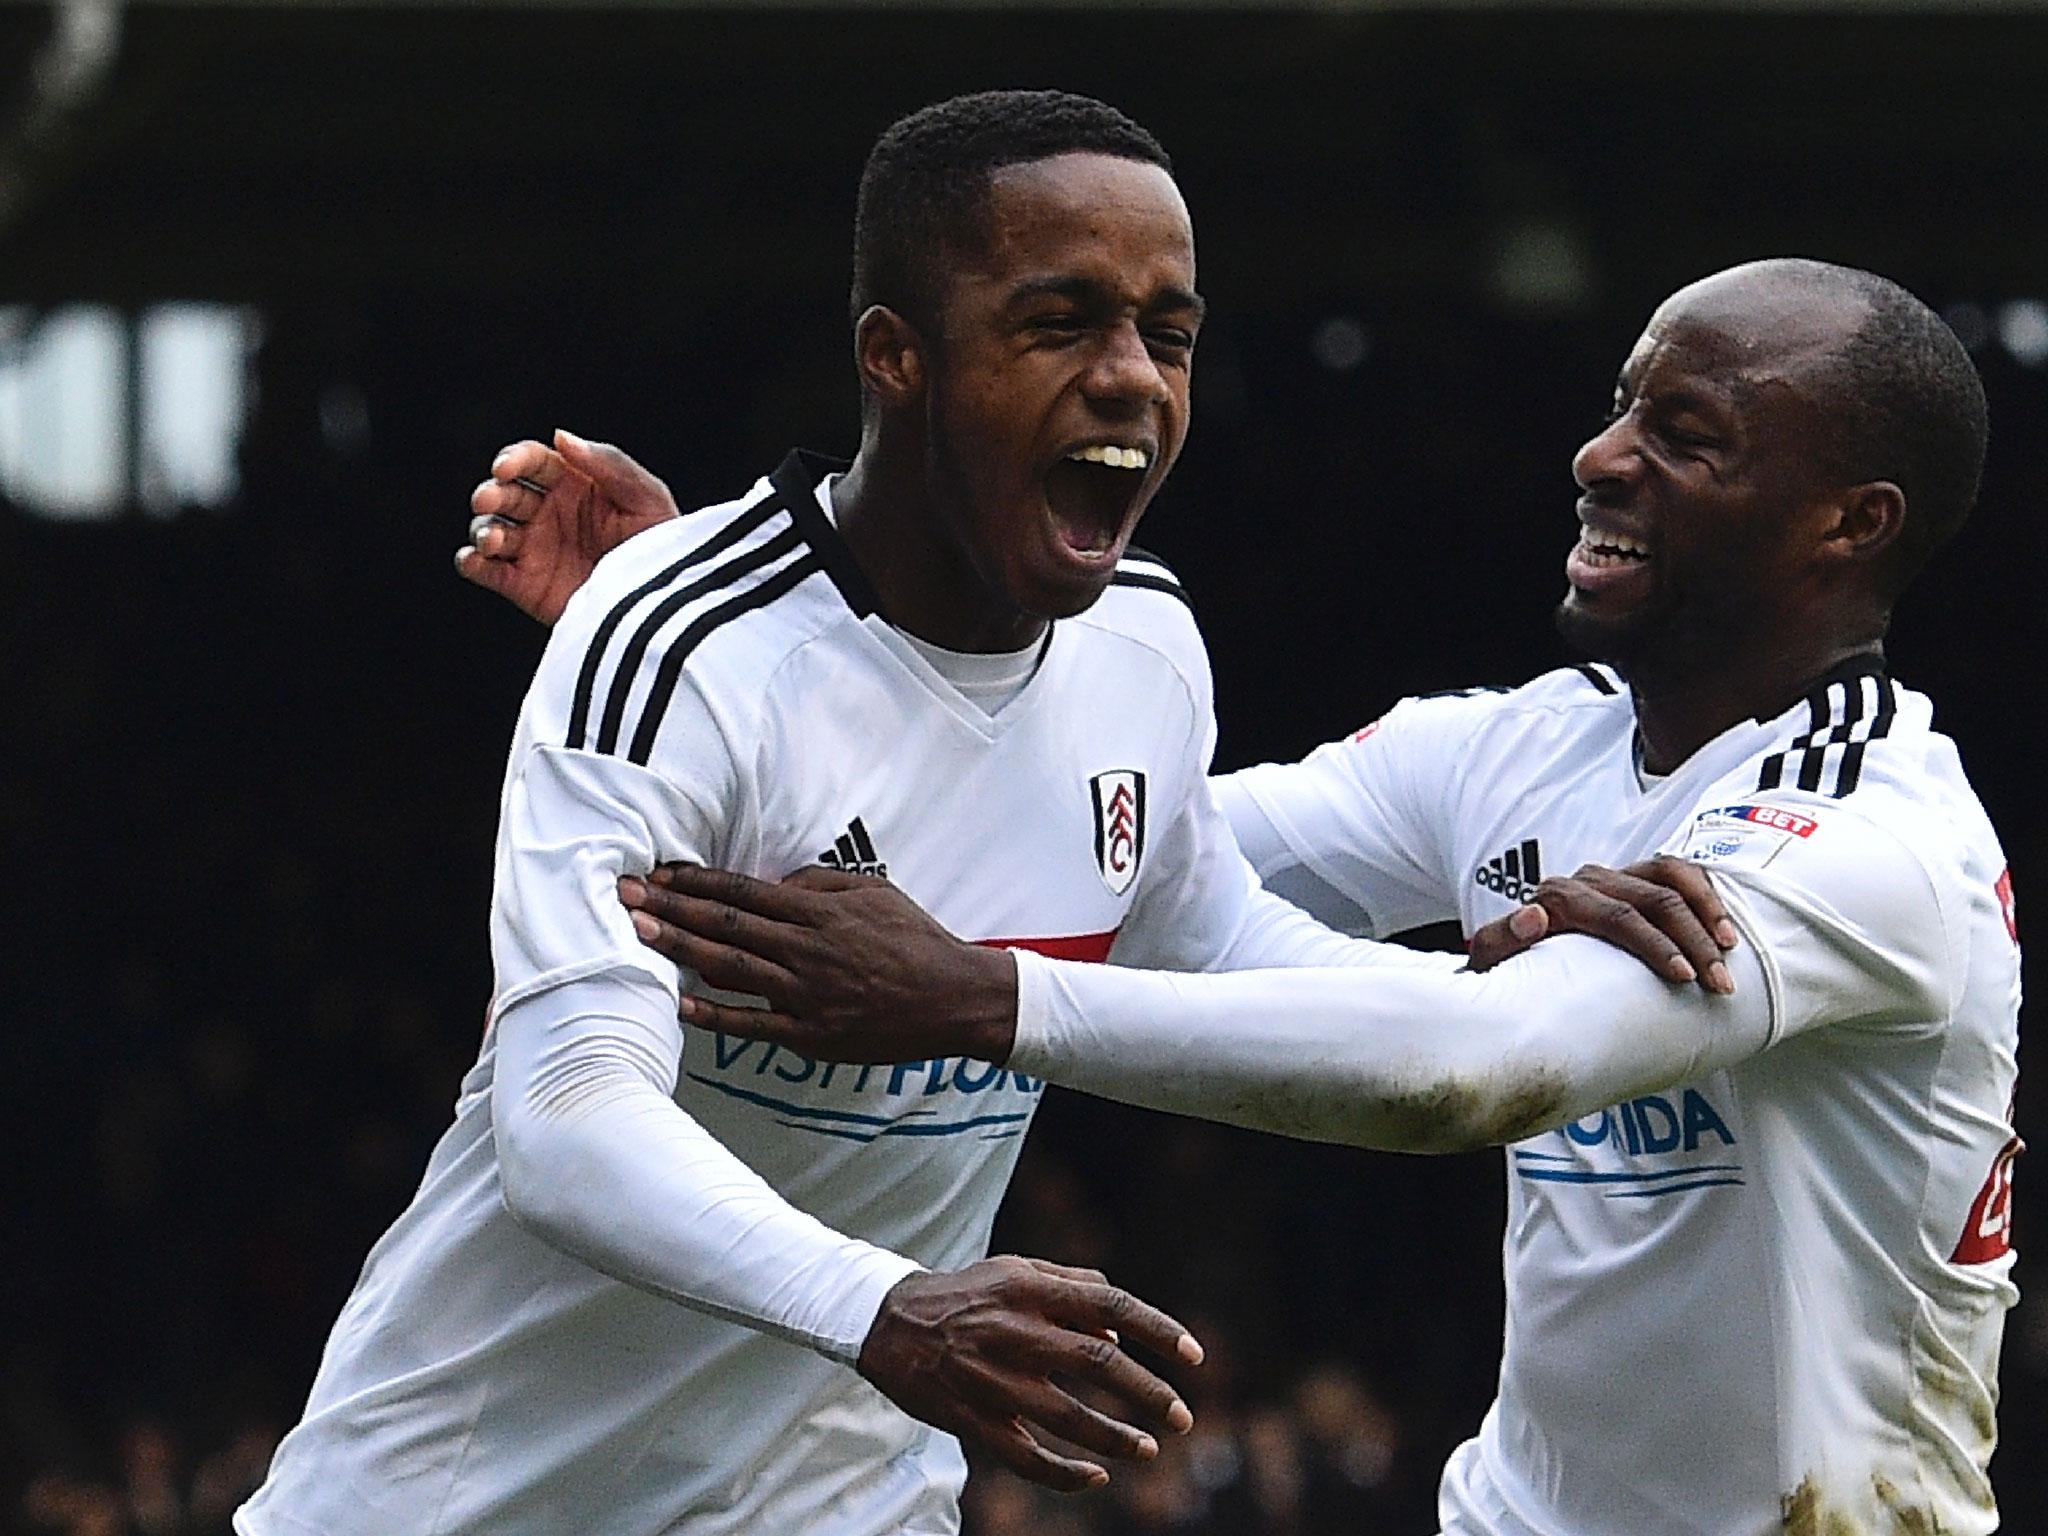 &#13;
Fulham have held on to Ryan Sessegnon &#13;